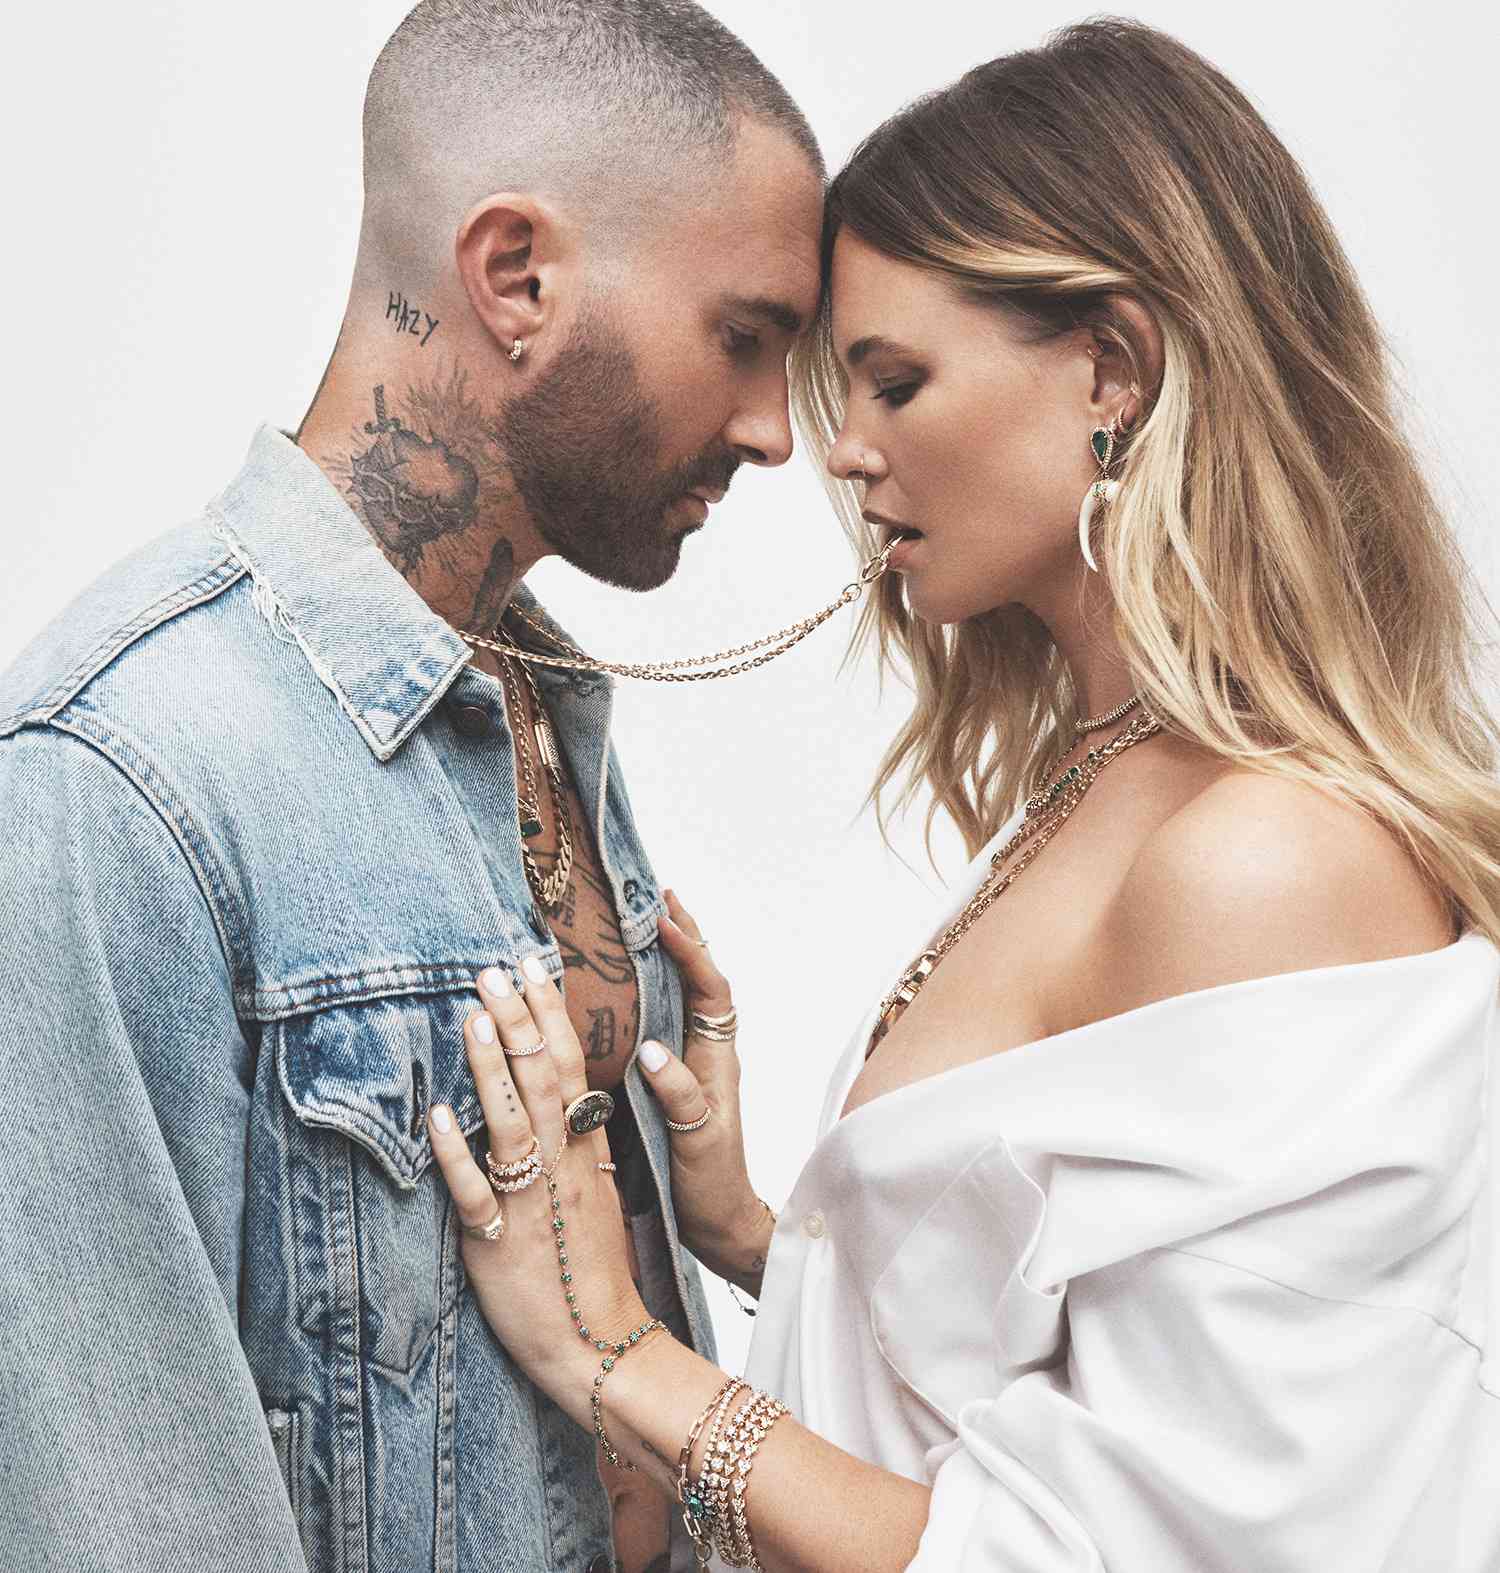 Adam Levine and Behati Prinsloo Put Their Sexy Love on Display for New Jewelry Campaign